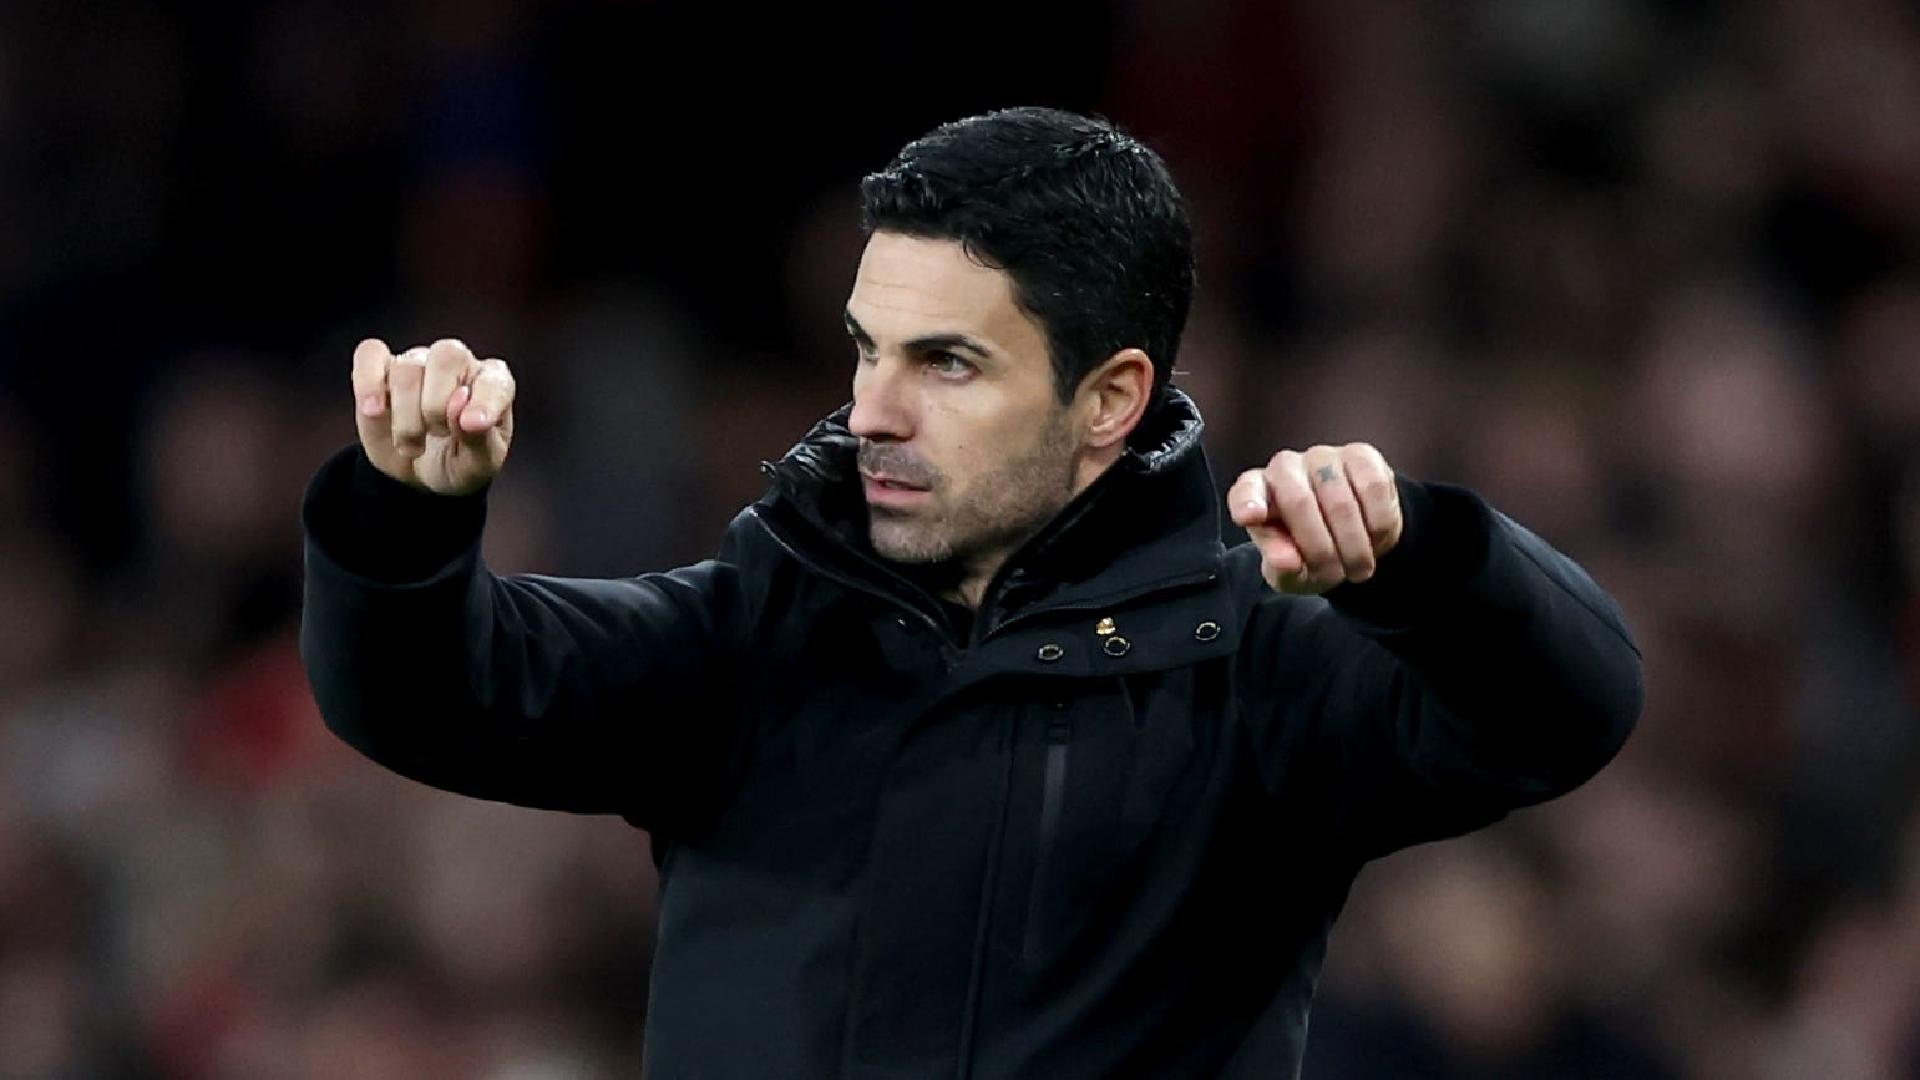 Mikel Arteta charged by FA following comments after Arsenal’s loss to Newcastle